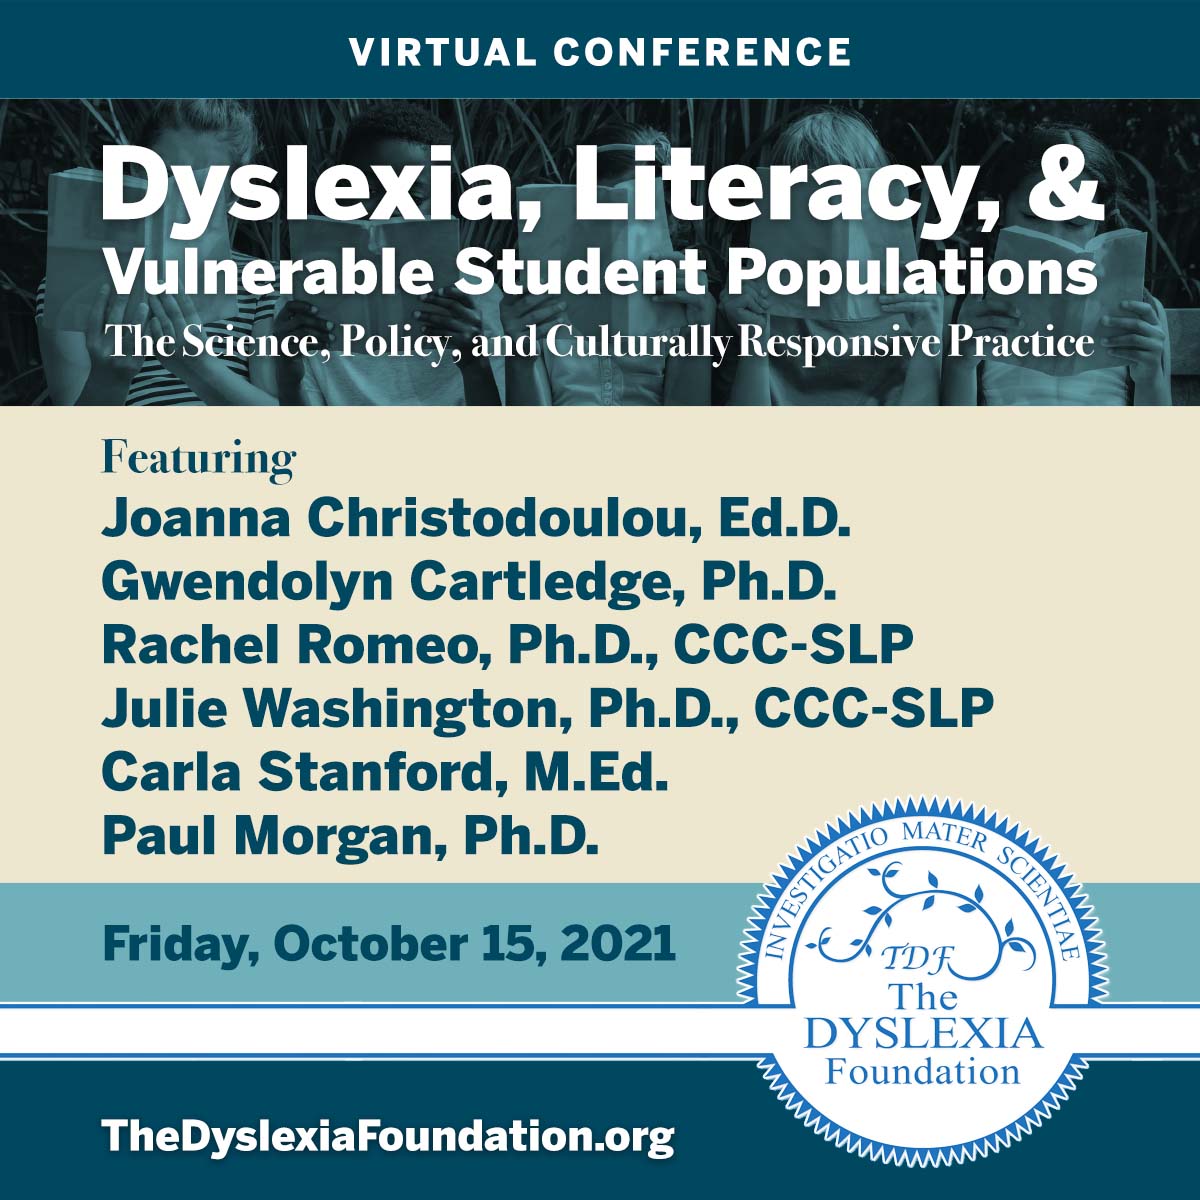 Join us virtually Friday October 15, 2021 #Dyslexia, #Literacy & Vulnerable Student Populations. Dr. Rachel Romeo will be speaking on 'The Relationships Between Language Development, Early Literacy, and Socioeconomic Status (SES)' Register: buff.ly/2MKVA2f #edchat